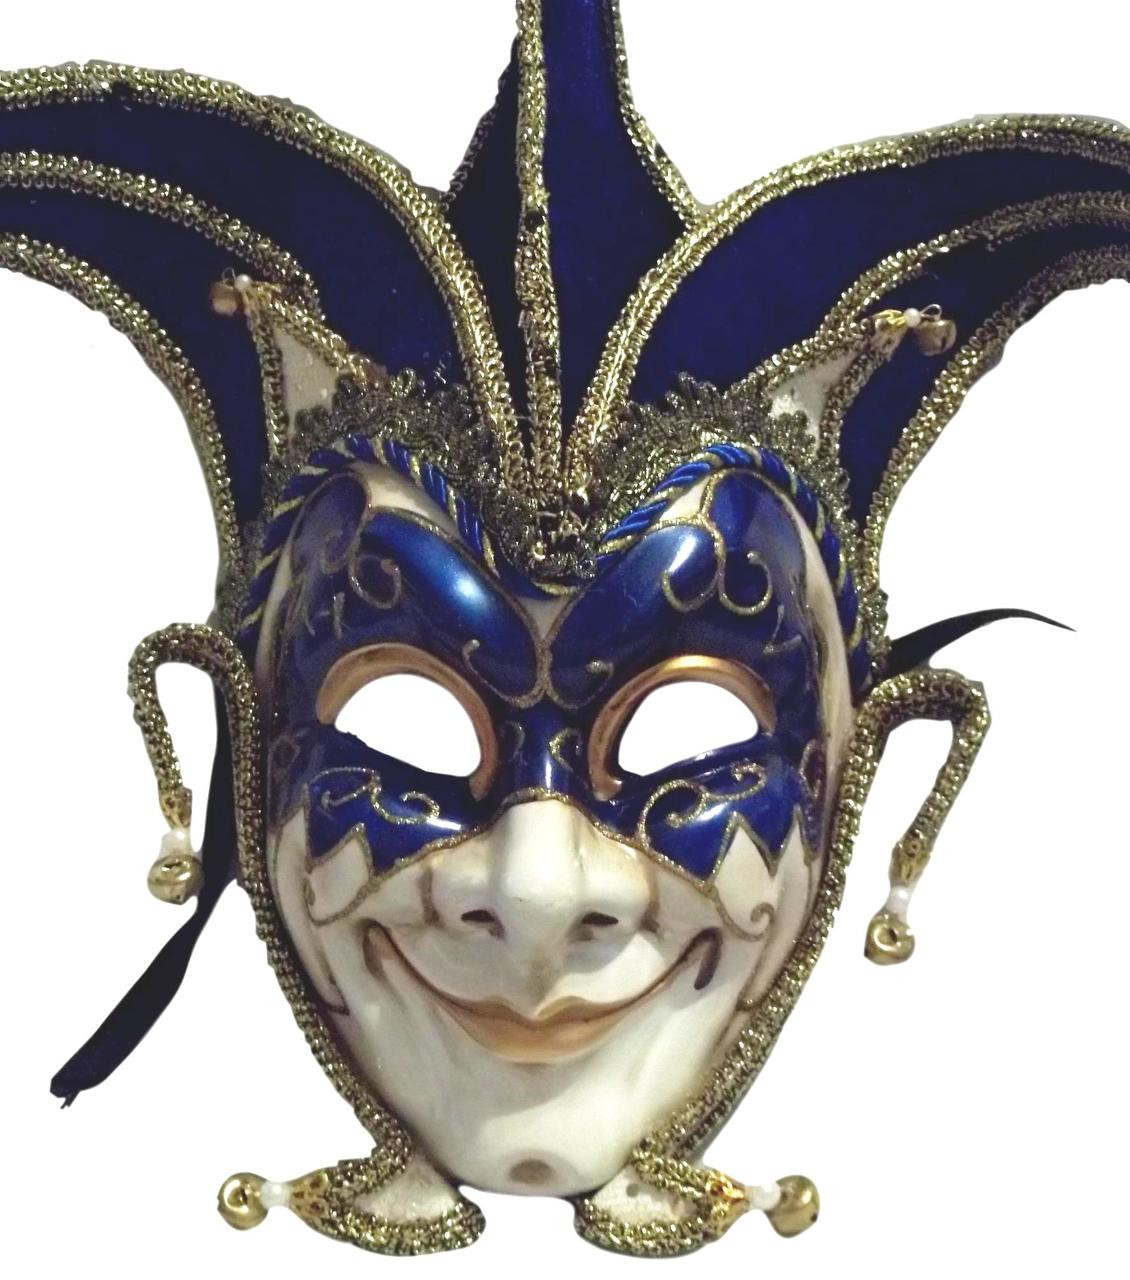 Full Face Venetian Mask Masquerade Mask for Carnival Mardi Gras Cosplay Halloween Party Wall Decoration